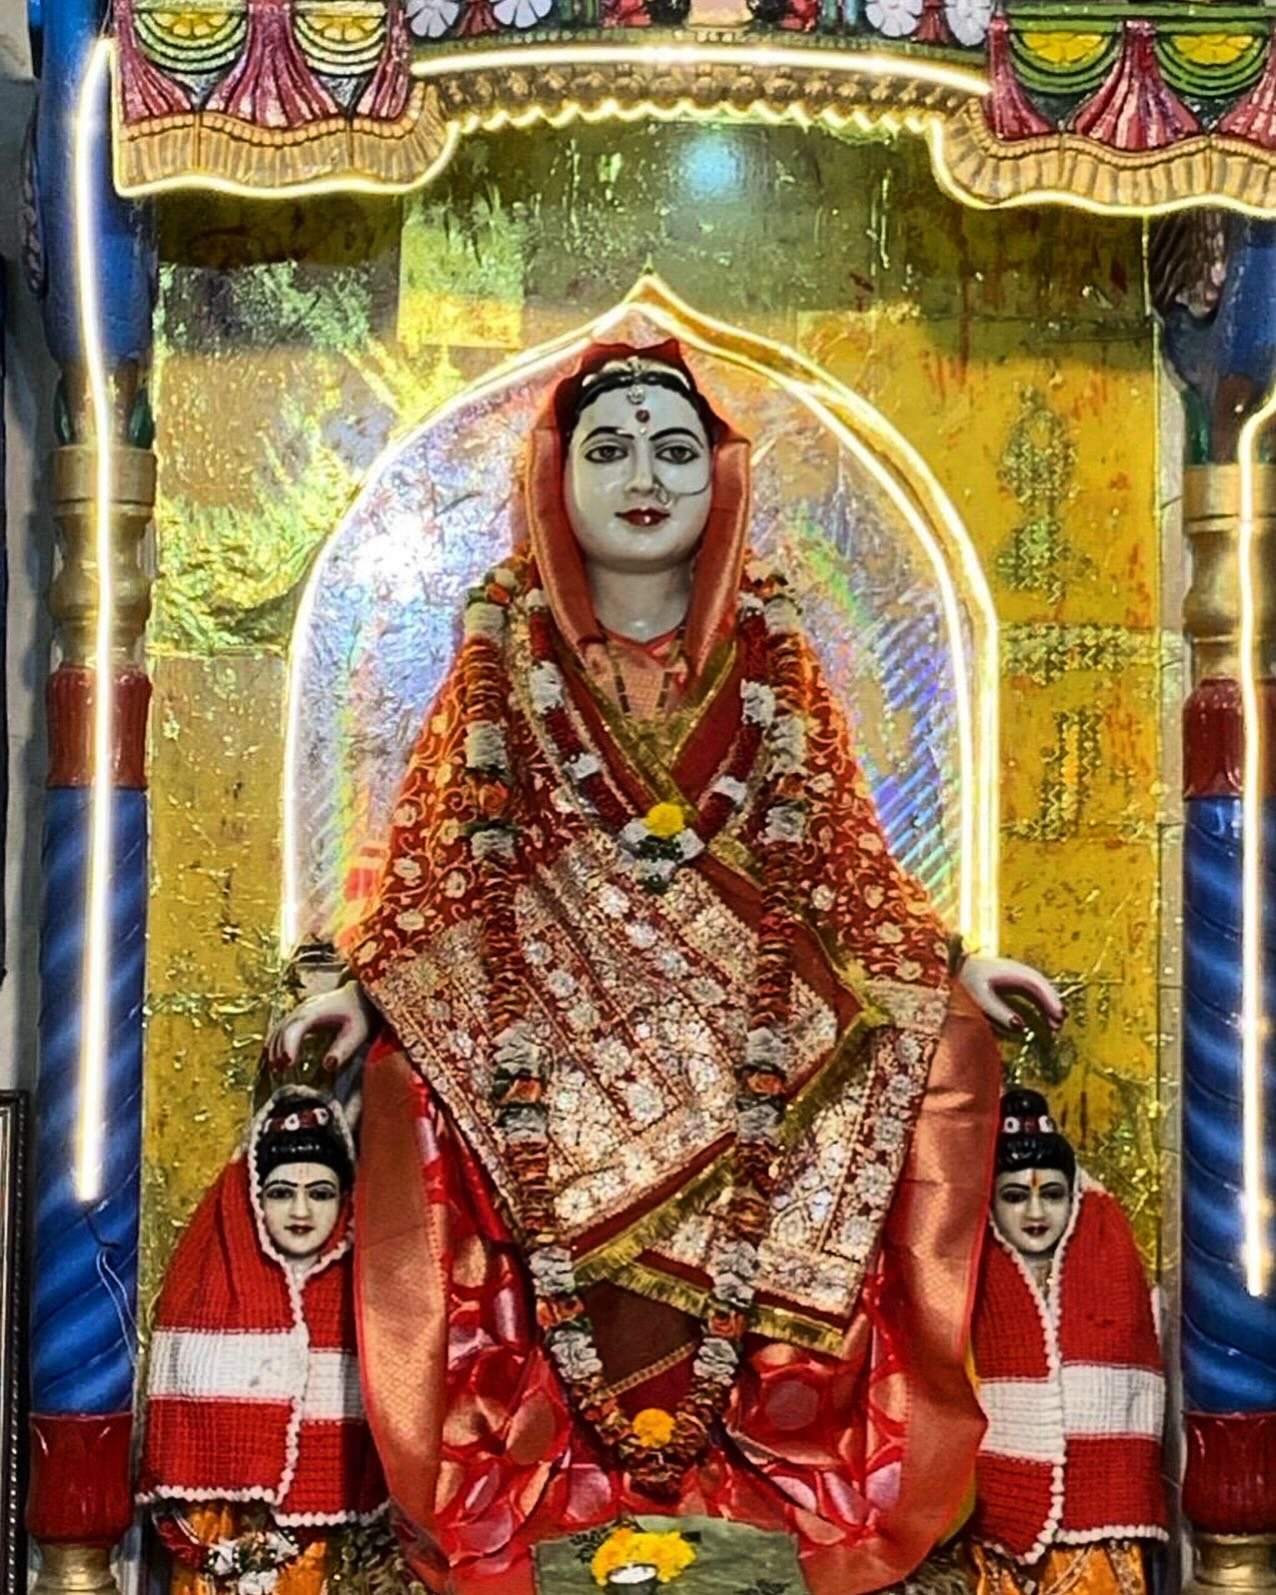 The Appearance Day of Two Great Vaishnavis!

May 16th, 2024, marks the auspicious appearance of two great Vaishnavi personalities: Sita Devi and Jahnava Devi. These are role models for Urban Devis aspiring to the devotional path of bhakti.

Lord Krsn